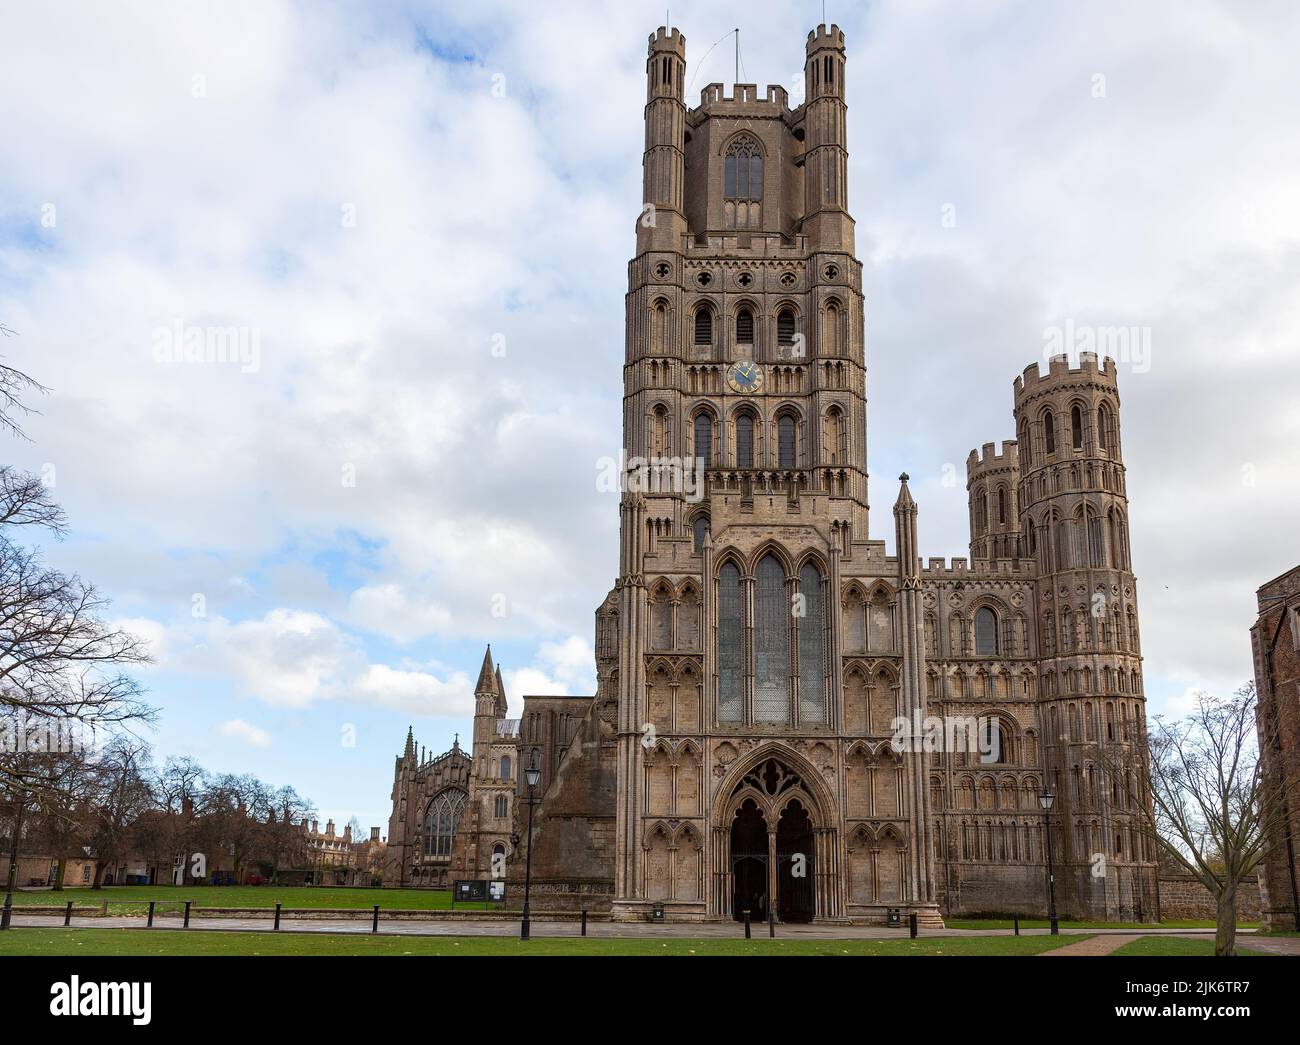 ELY, CAMBRIDGESHIRE, UK - NOVEMBER 22 : Exterior view of Ely Cathedral in Ely on November 22, 2012 Stock Photo